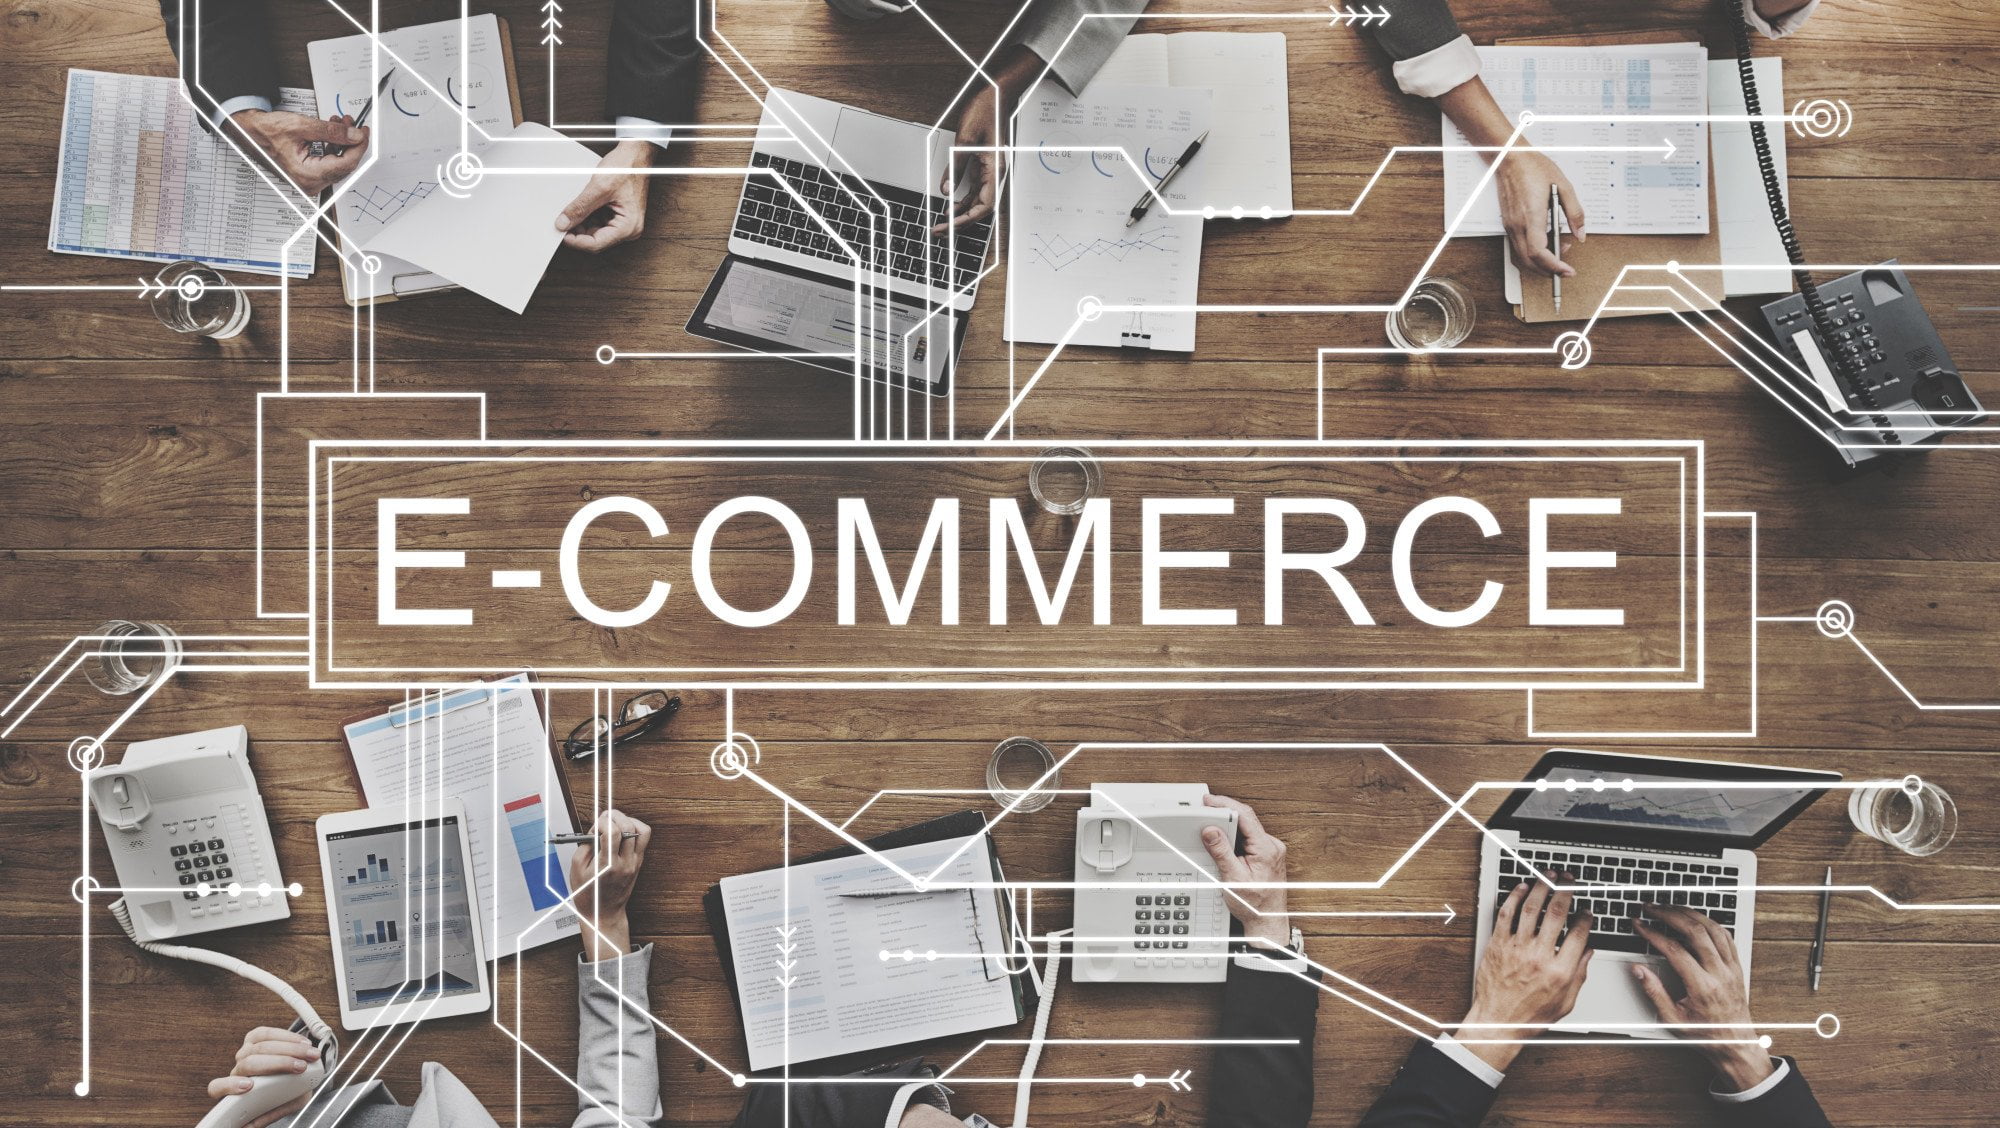 Proper planning is important for starting a successful online business. See our tips about writing an eCommerce business plan to learn more today.